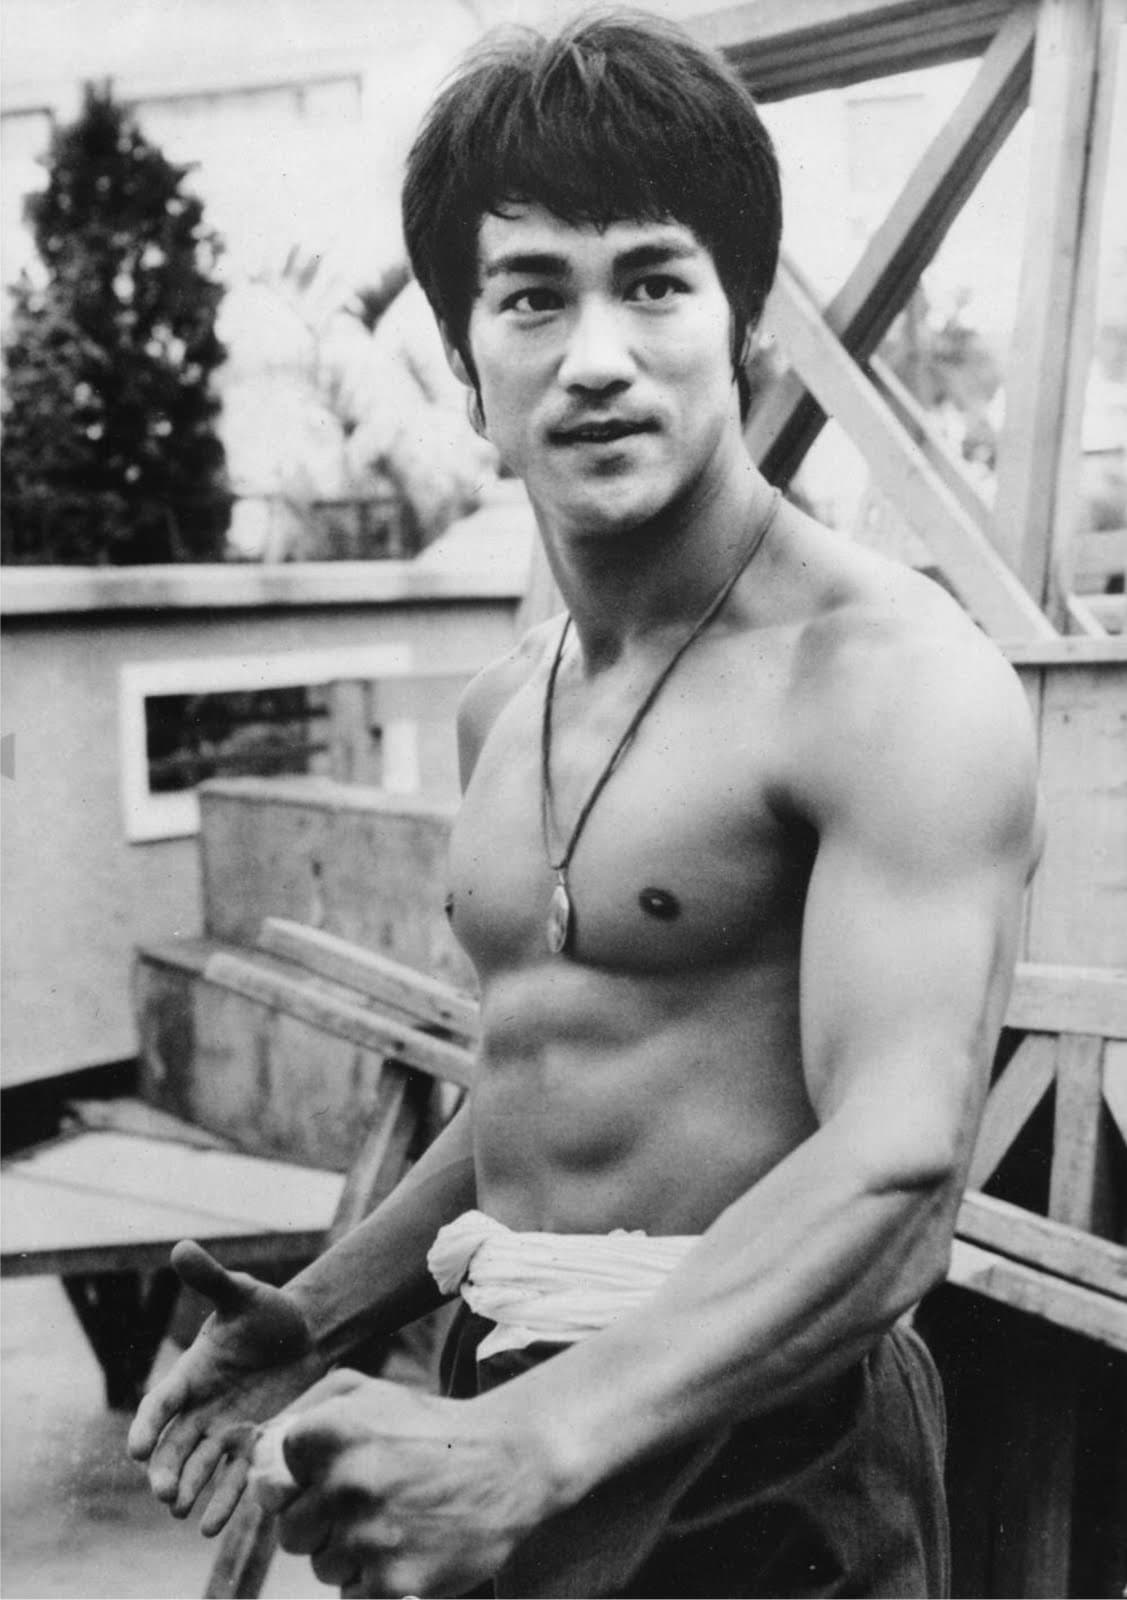 Young Bruce Lee | Photos of Bruce Lee When He Was Young